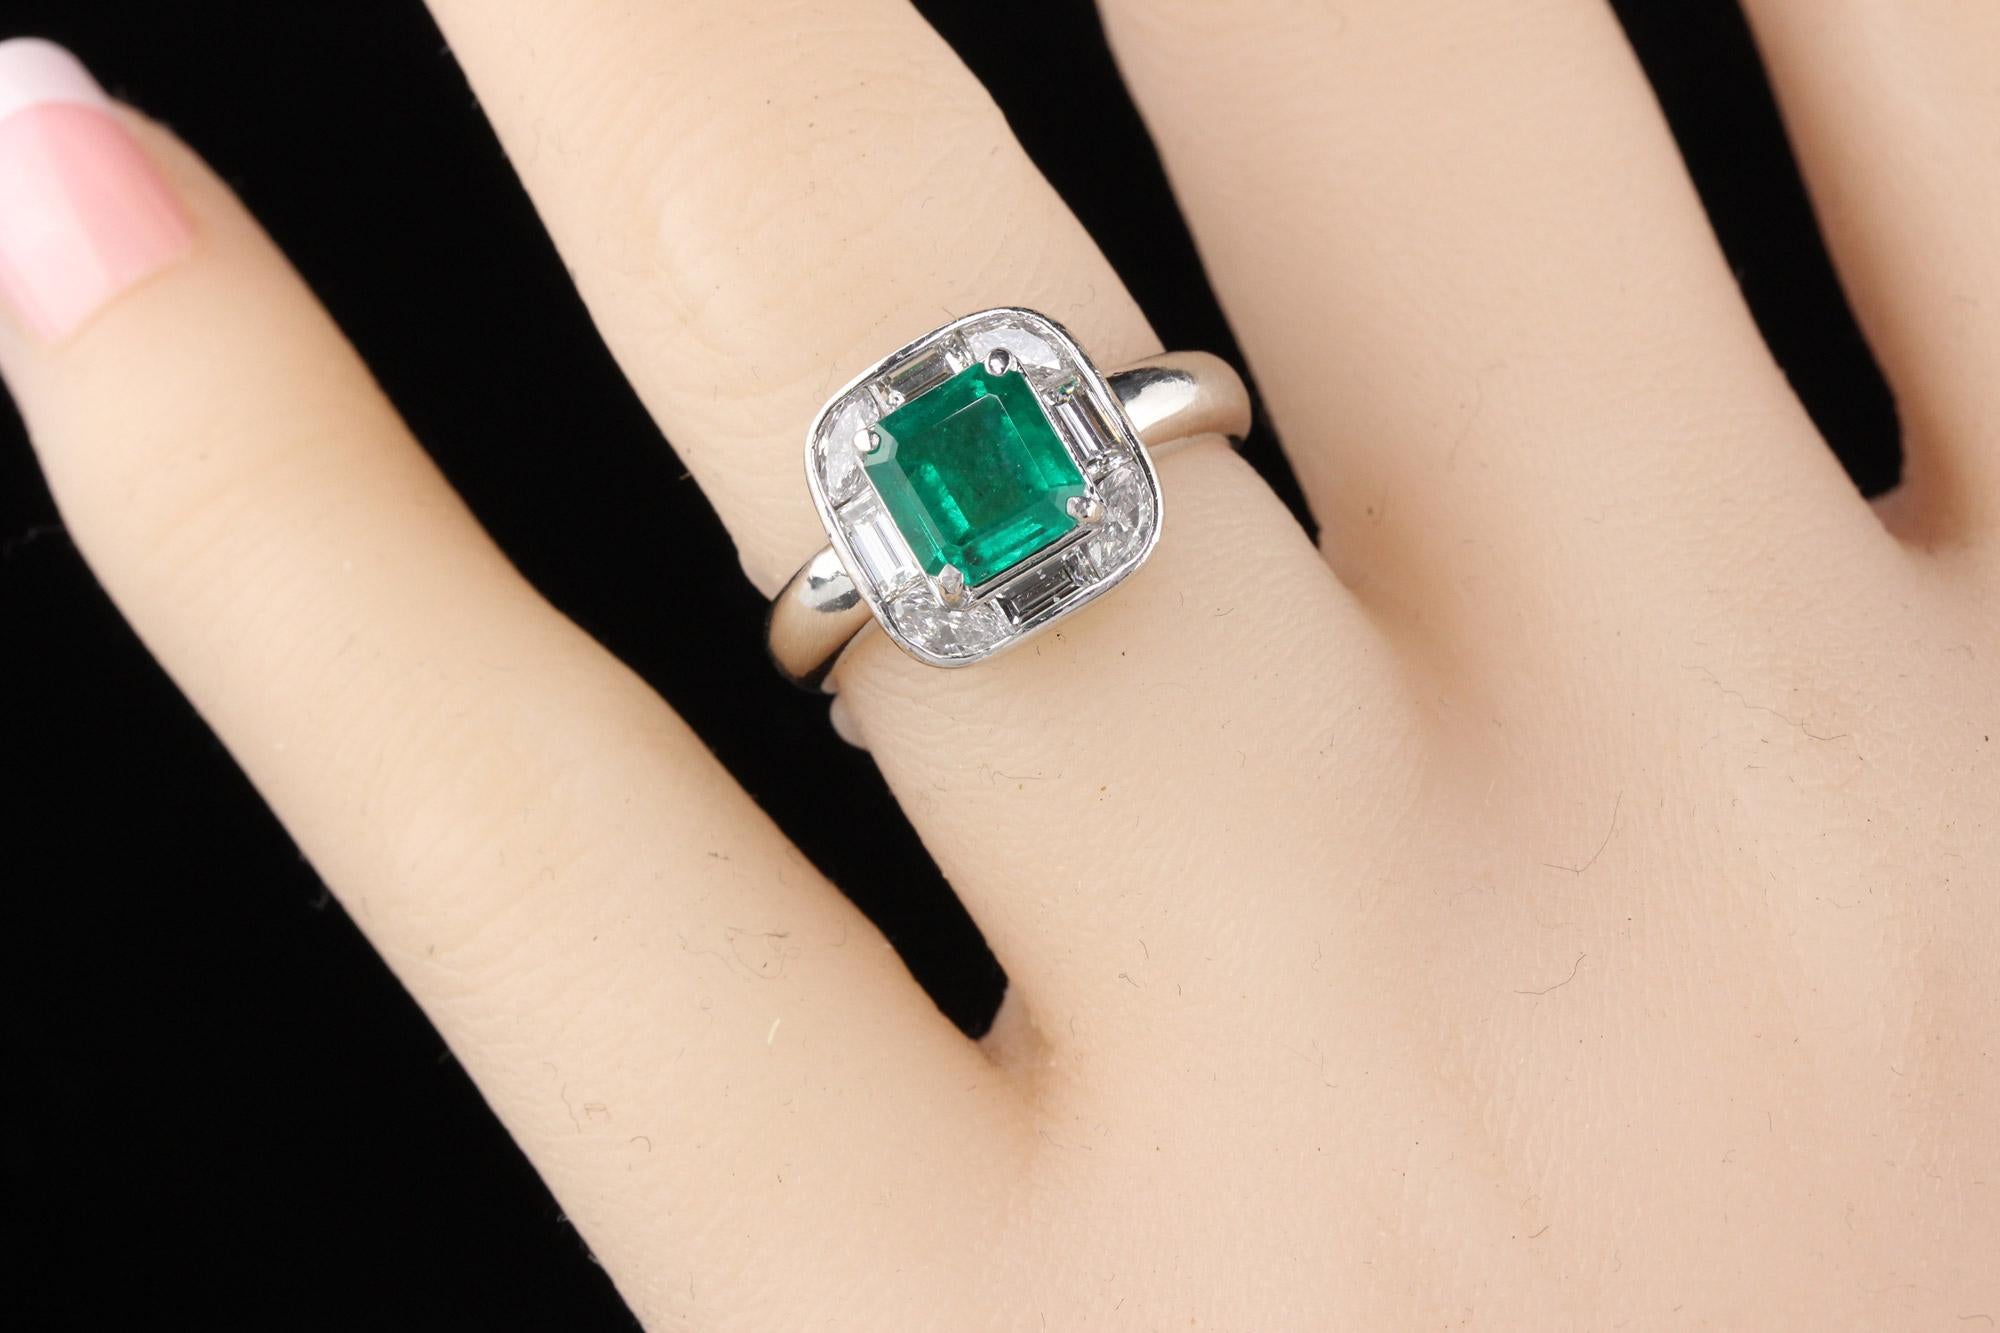 Vintage Estate Platinum Colombian Emerald and Diamond Ring, GIA Certified 2